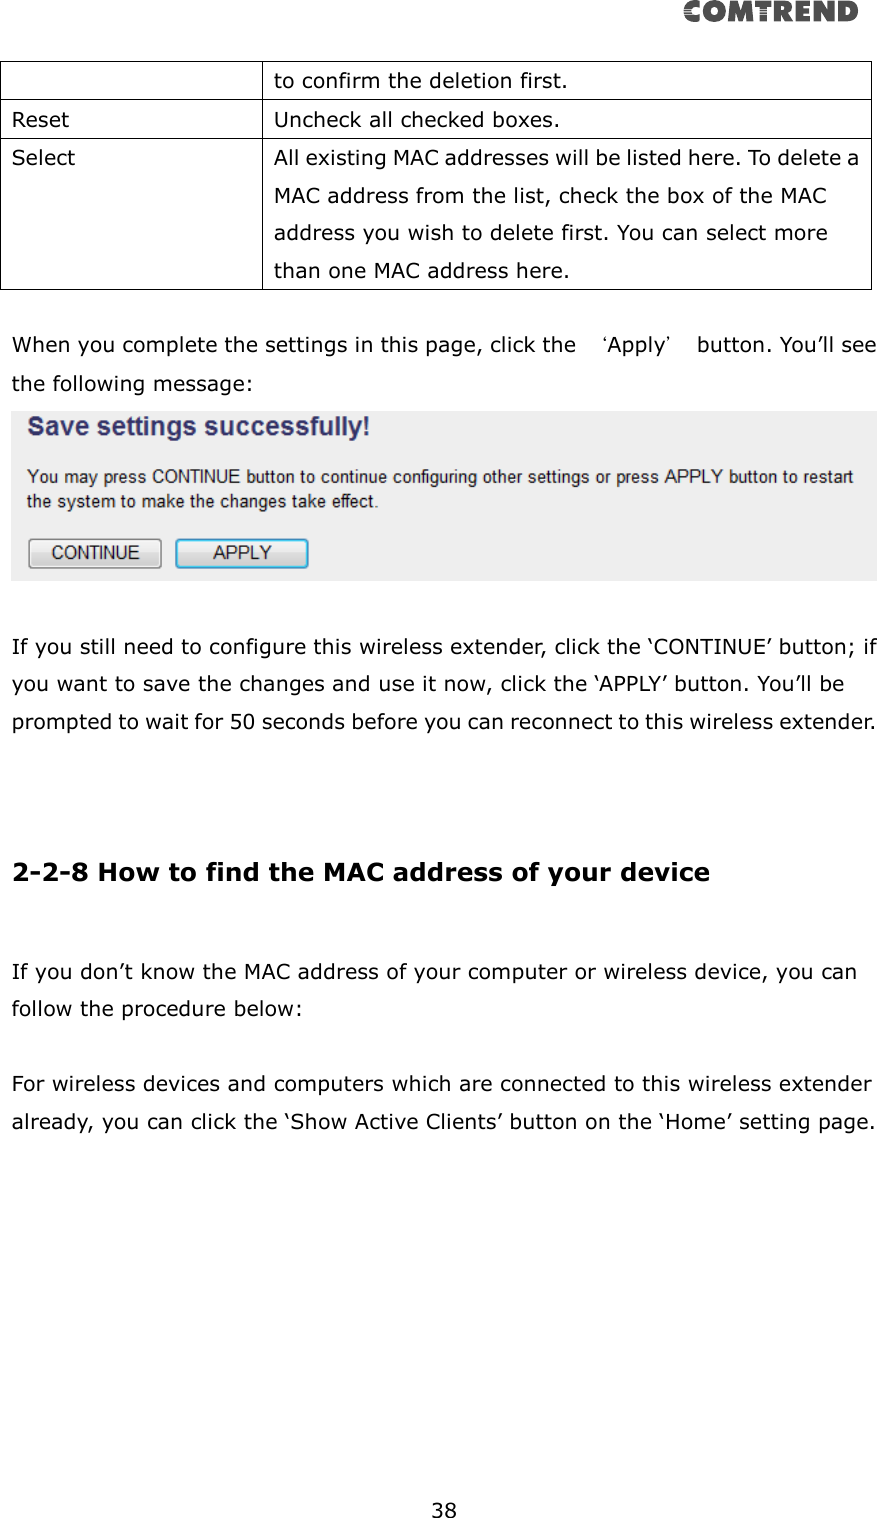       38  to confirm the deletion first. Reset Uncheck all checked boxes. Select All existing MAC addresses will be listed here. To delete a MAC address from the list, check the box of the MAC address you wish to delete first. You can select more than one MAC address here.  When you complete the settings in this page, click the  ‘Apply’  button. You’ll see the following message:  If you still need to configure this wireless extender, click the ‘CONTINUE’ button; if you want to save the changes and use it now, click the ‘APPLY’ button. You’ll be prompted to wait for 50 seconds before you can reconnect to this wireless extender.    2-2-8 How to find the MAC address of your device  If you don’t know the MAC address of your computer or wireless device, you can follow the procedure below:  For wireless devices and computers which are connected to this wireless extender already, you can click the ‘Show Active Clients’ button on the ‘Home’ setting page.  